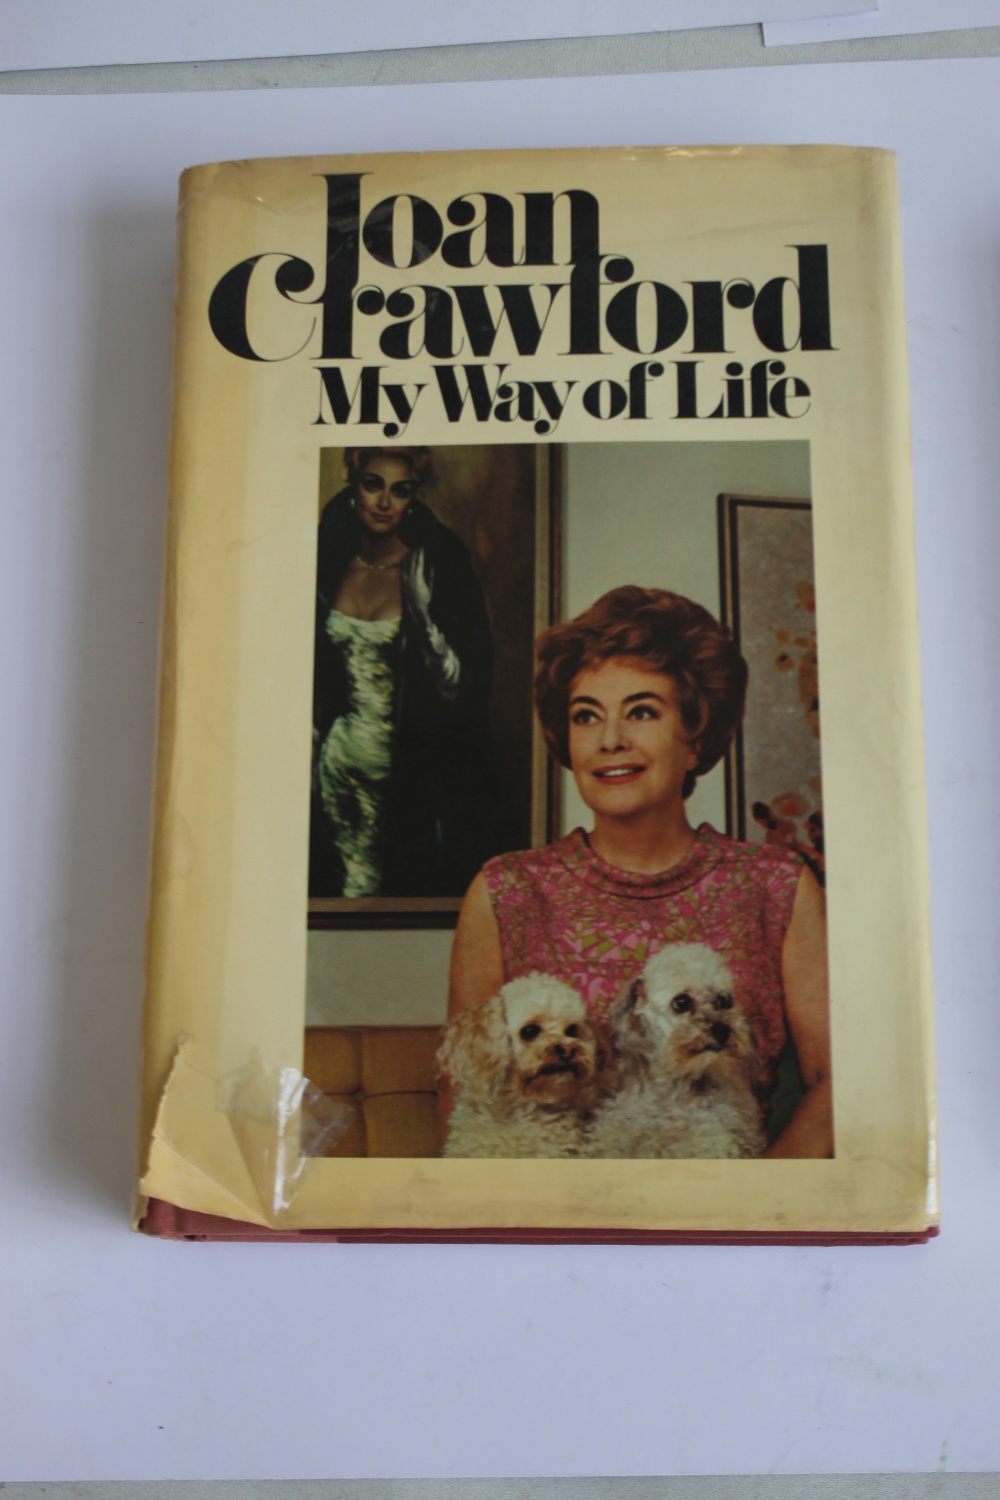 JOAN CRAWFORD - 'MY WAY OF LIFE' Simon & Schuster 1971 3rd printing with a dustjacket together - Image 2 of 7